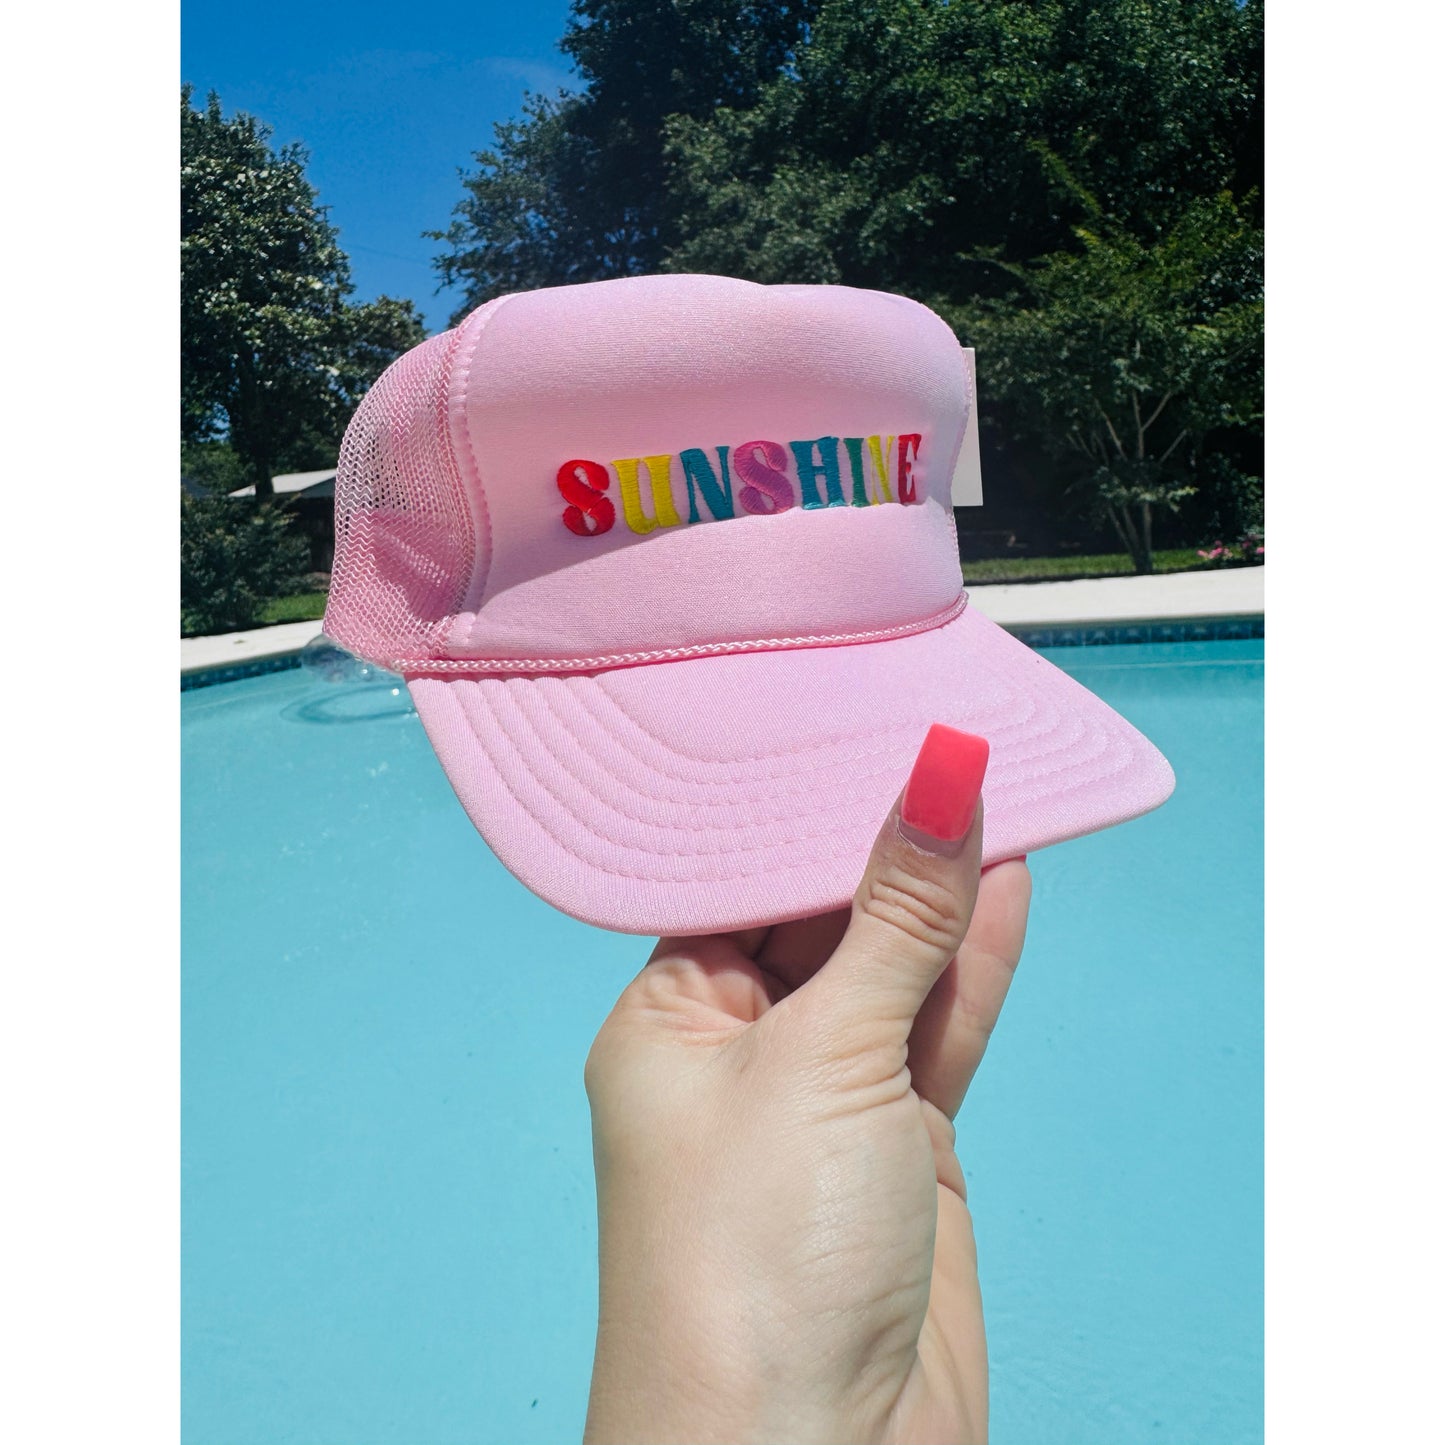 Colorful Sunshine Trucker Hat | Ready to ship